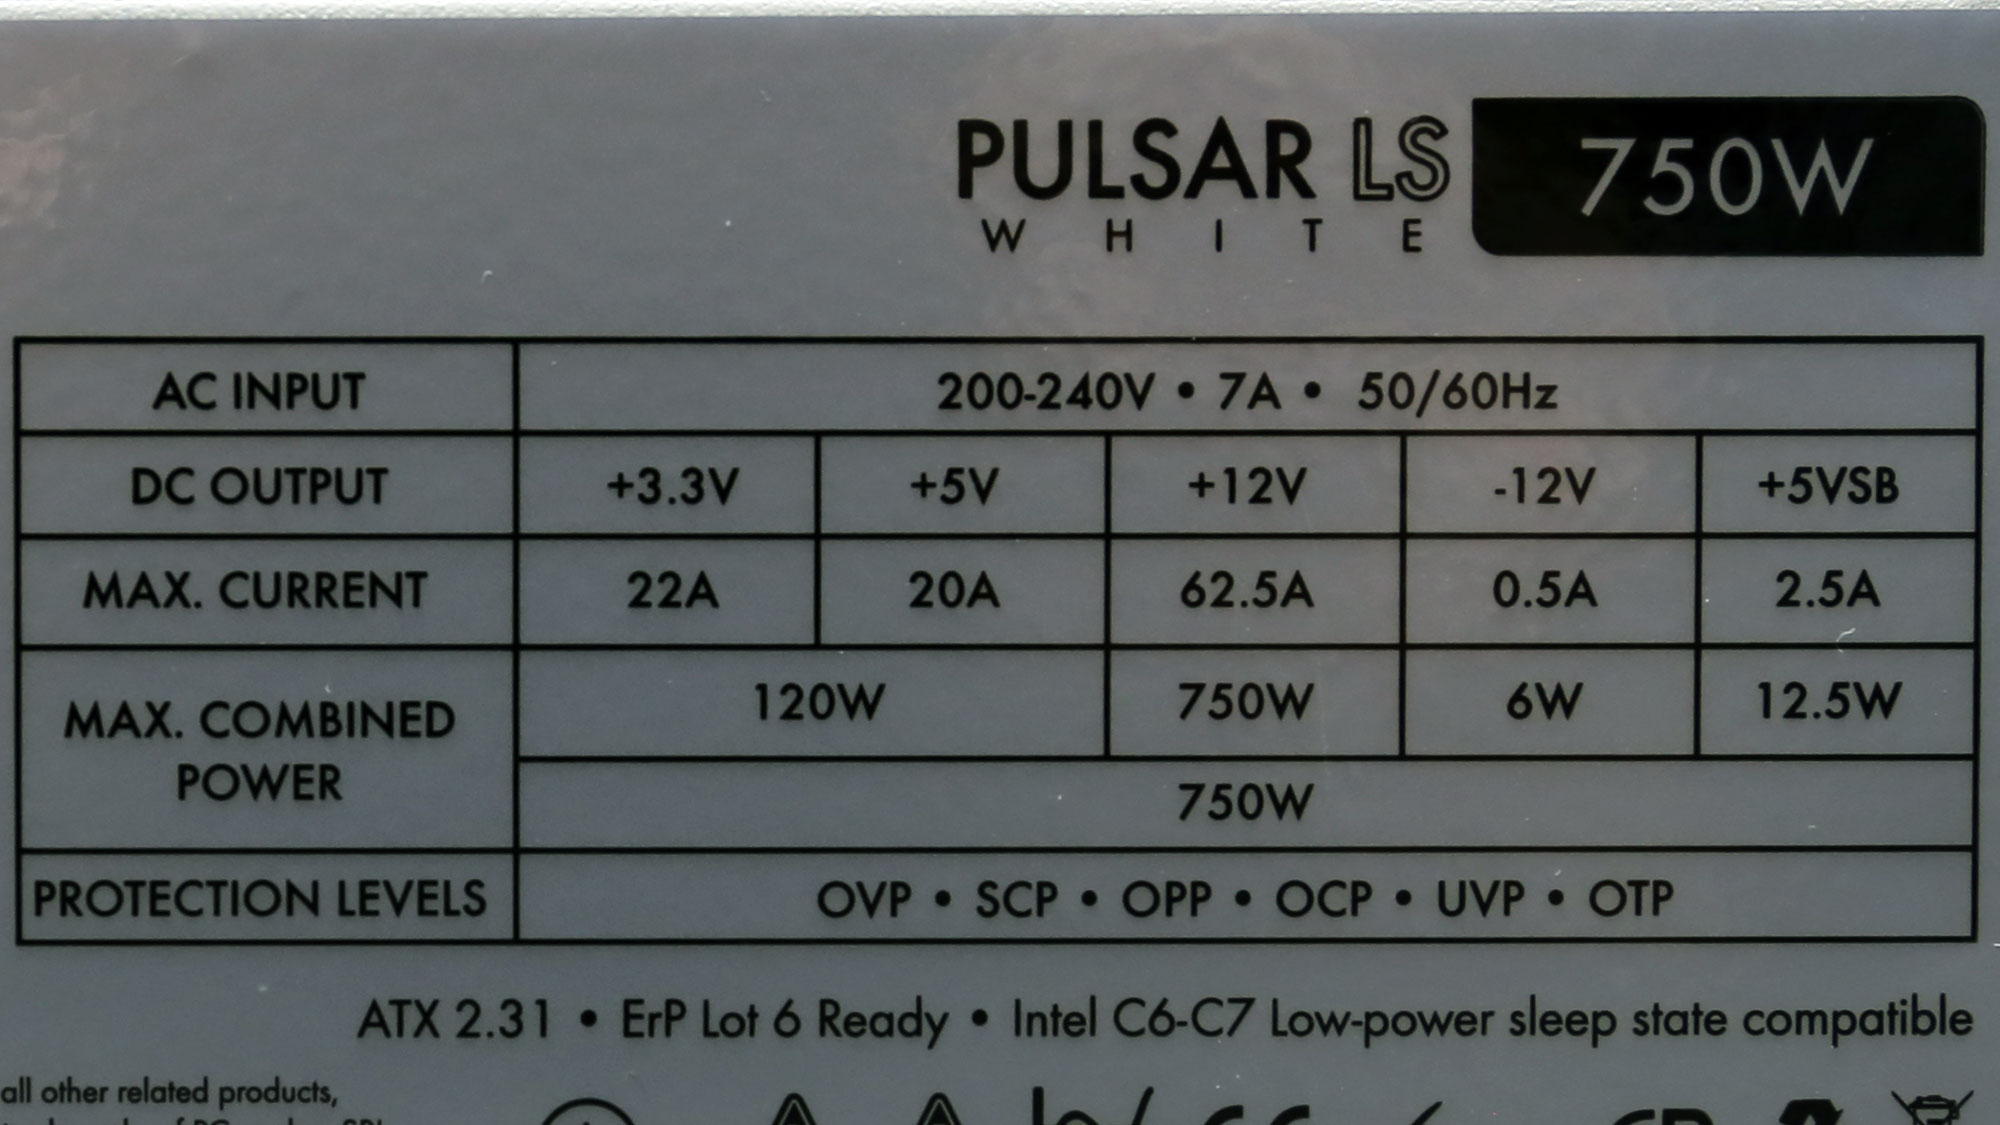 AQIRYS Pulsar LS White 750 W Review - Photos & Cables